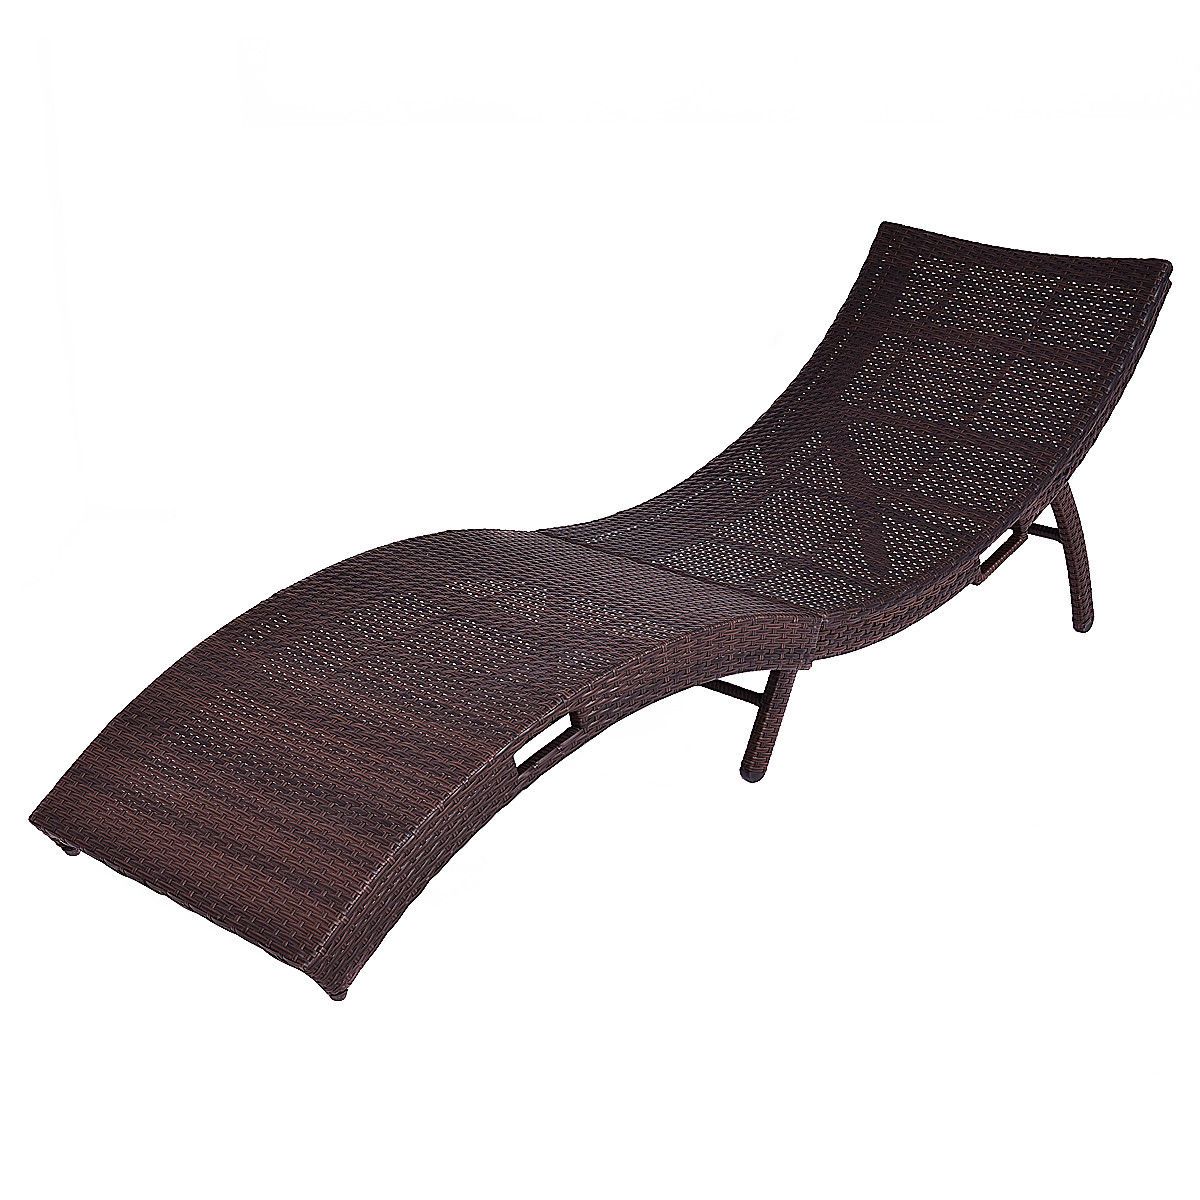 Popular Costway Mix Brown Folding Patio Rattan Chaise Lounge Chair Outdoor  Furniture Pool Side With Regard To Curved Folding Chaise Loungers (View 7 of 25)